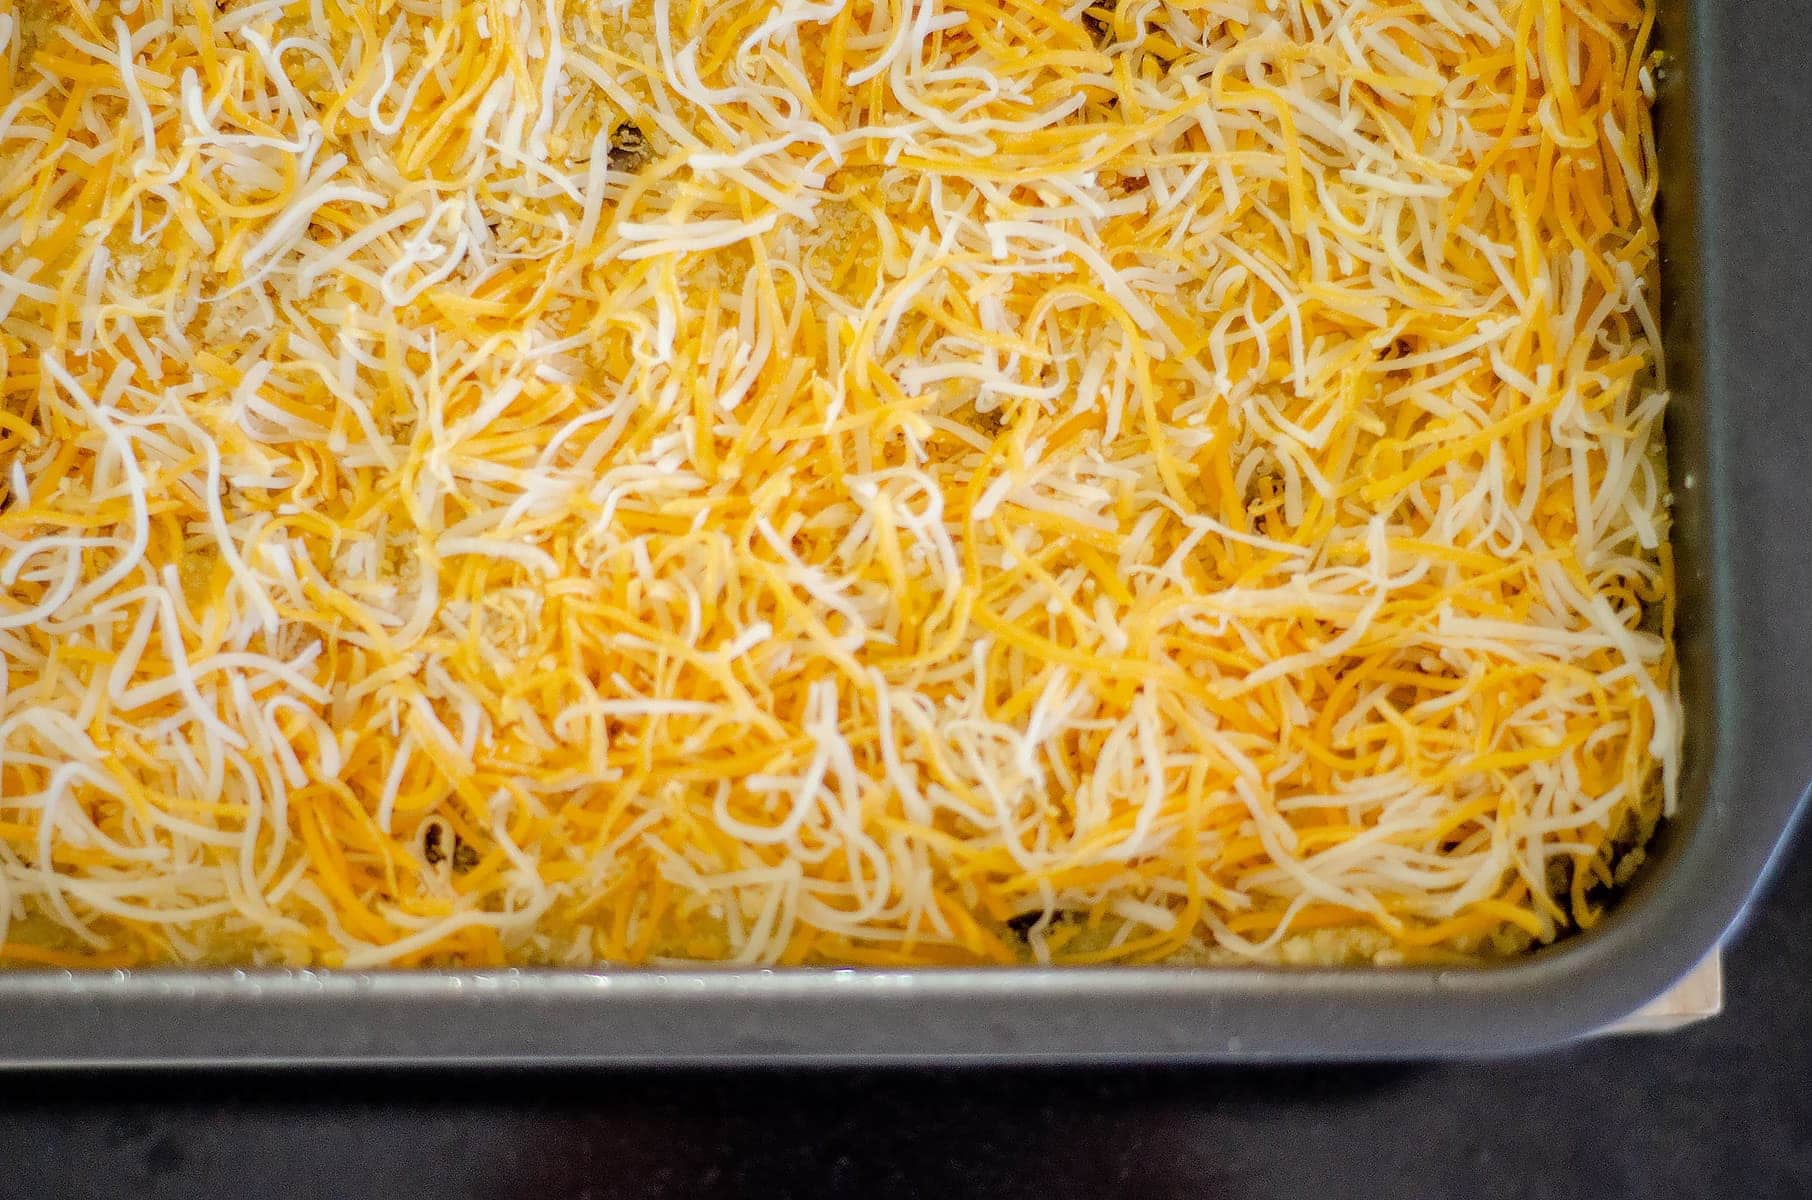 Layered cornmeal casserole topped with cheese